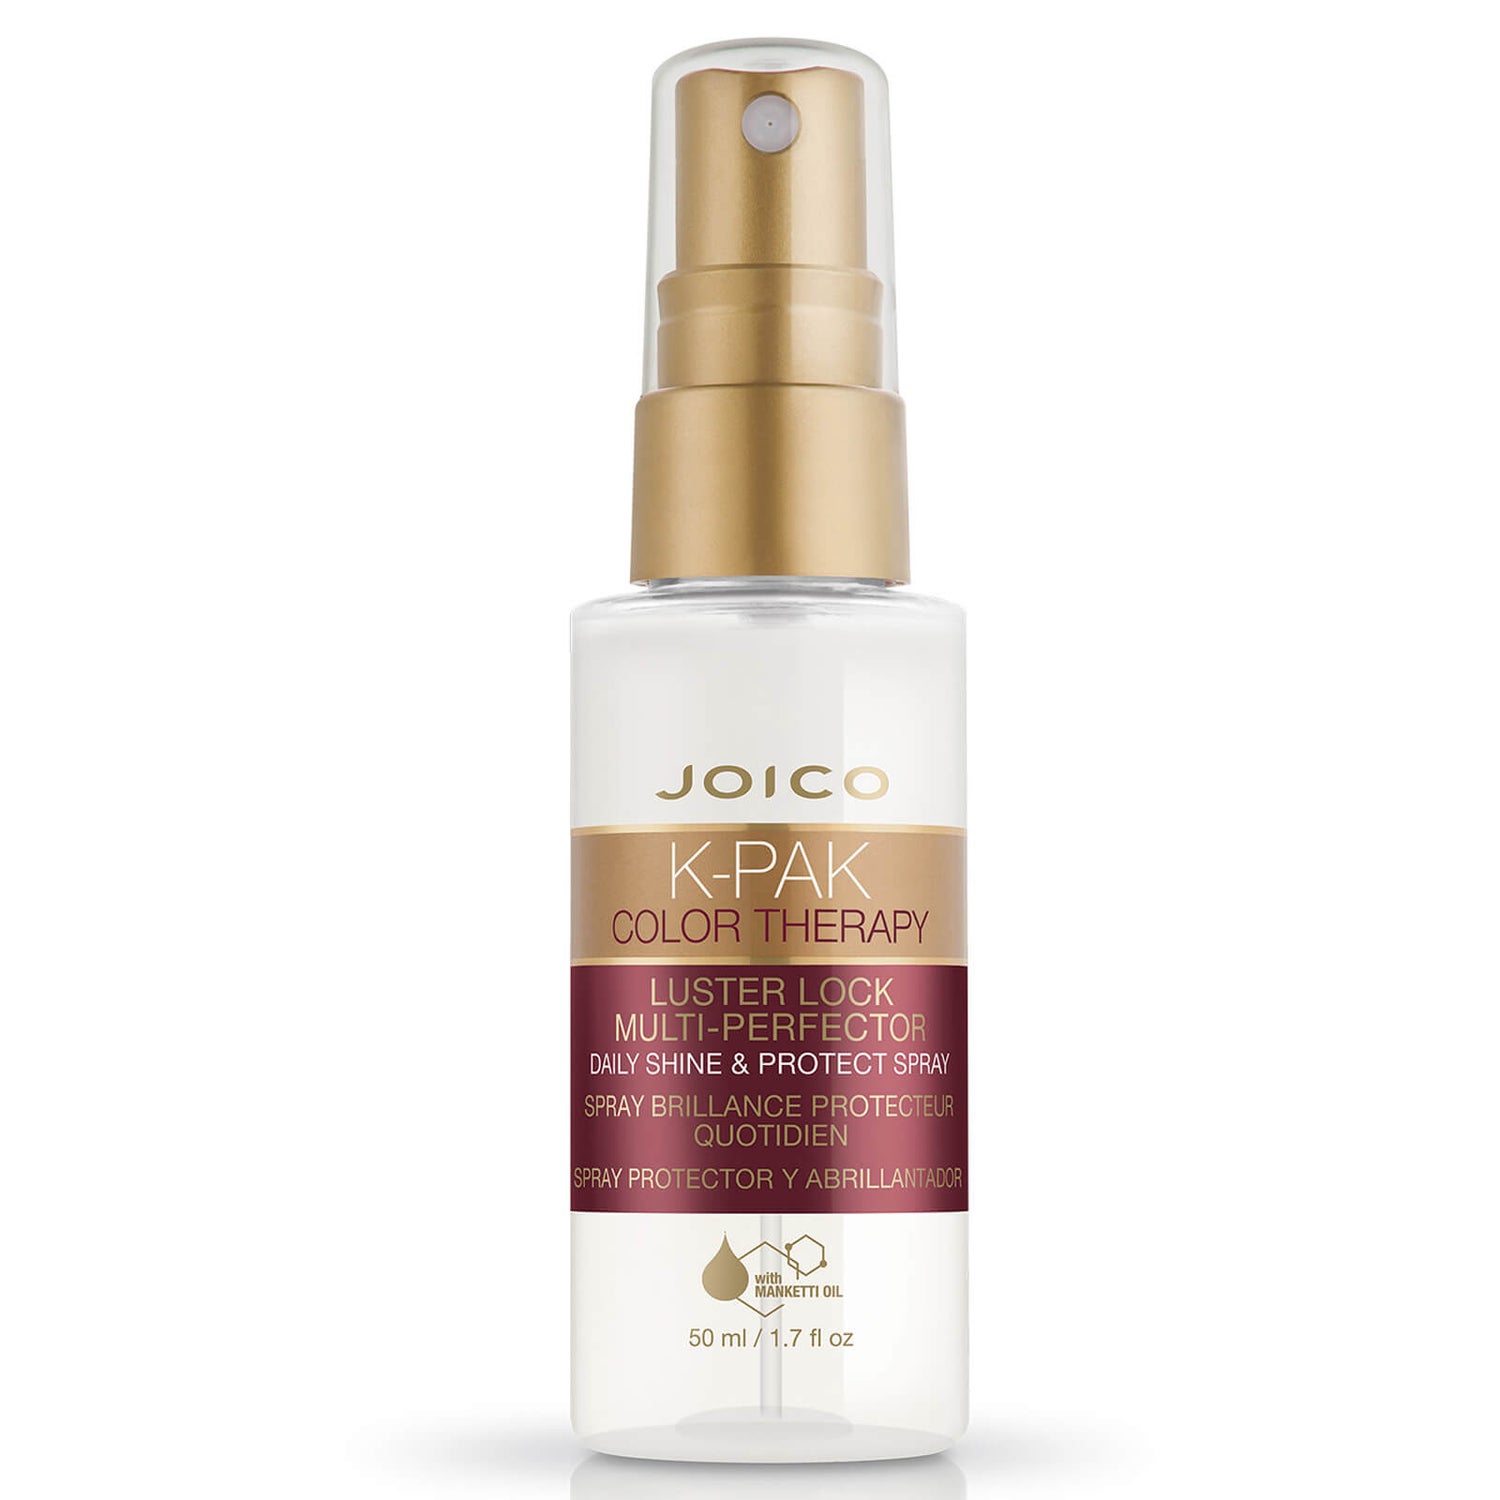 Joico K-Pak Color Therapy Luster Lock Multi-Perfector Daily Shine and Protect Spray 50 ml